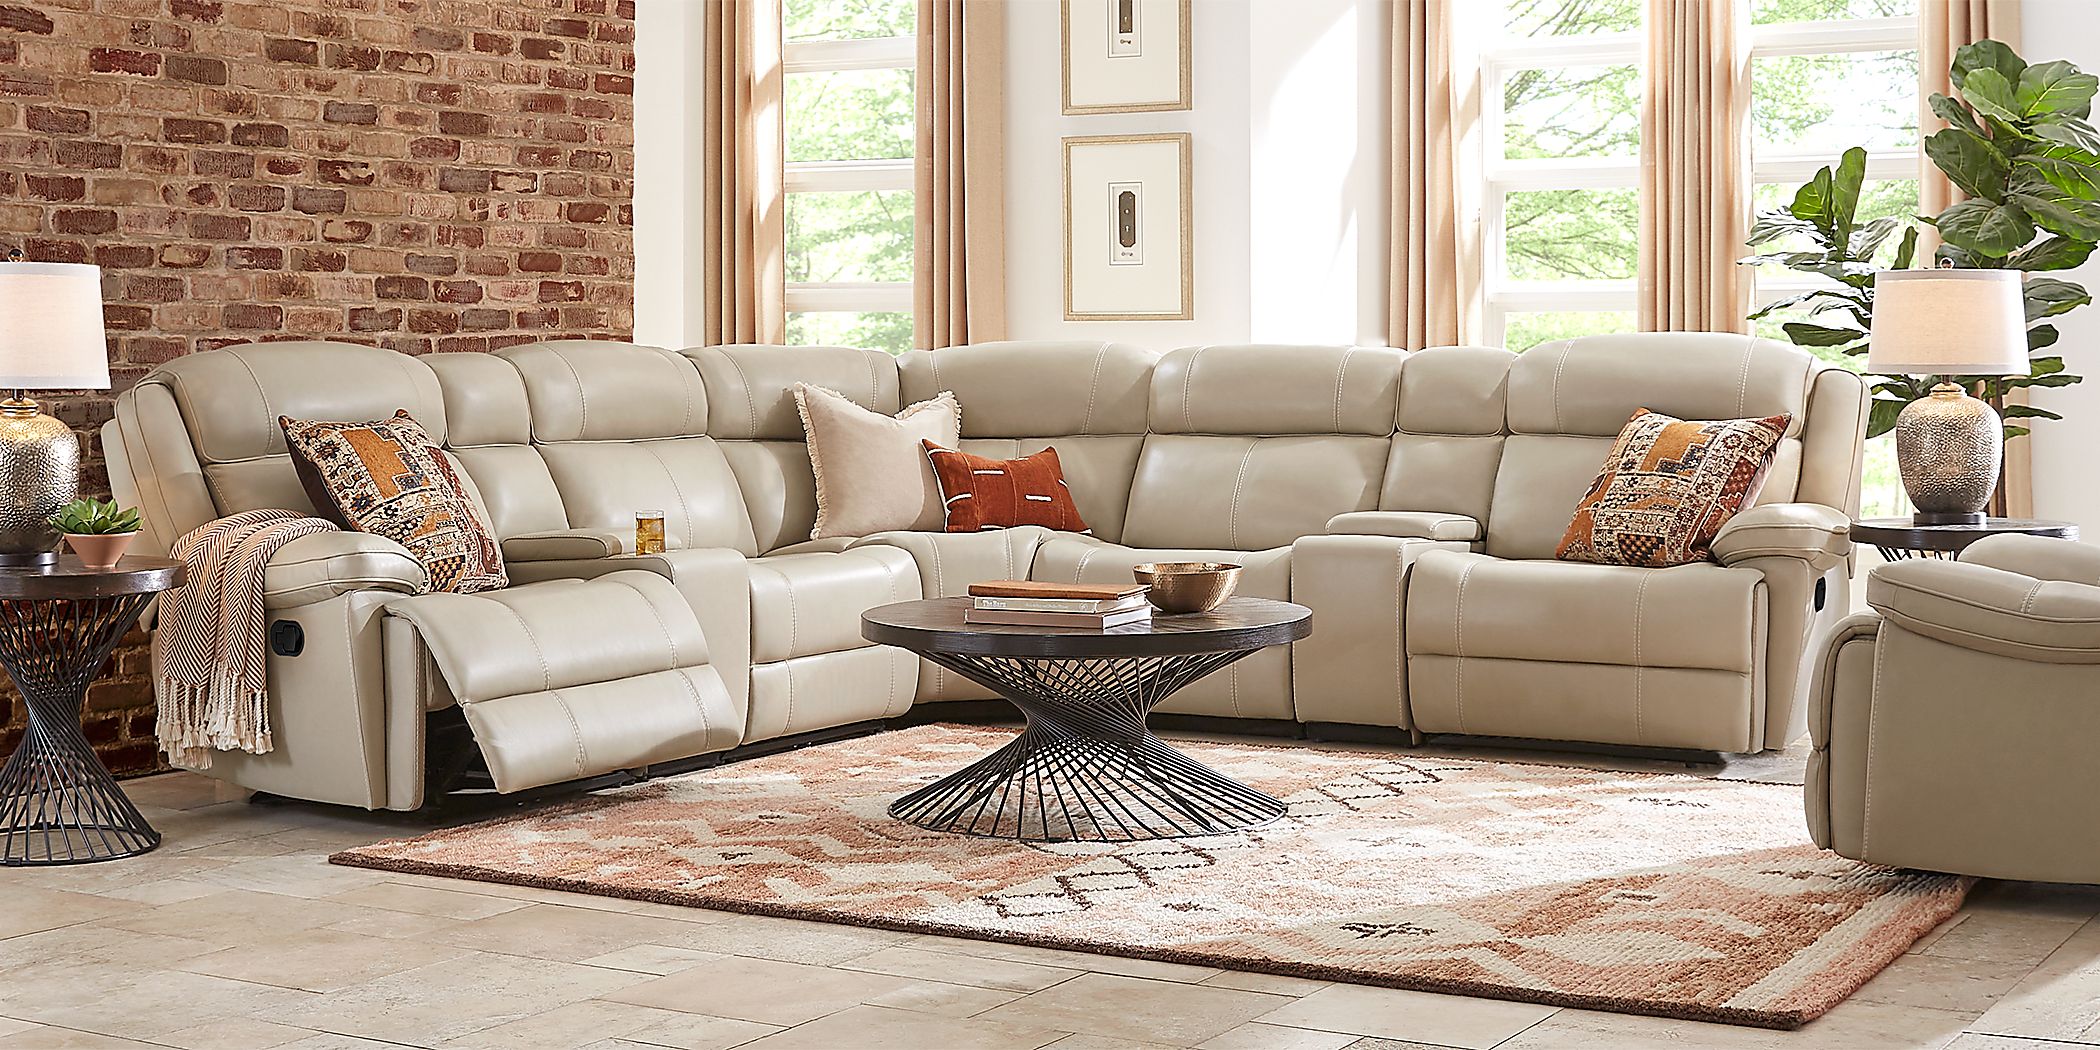 West Valley Beige 7 Pc Leather Reclining Sectional - Rooms To Go